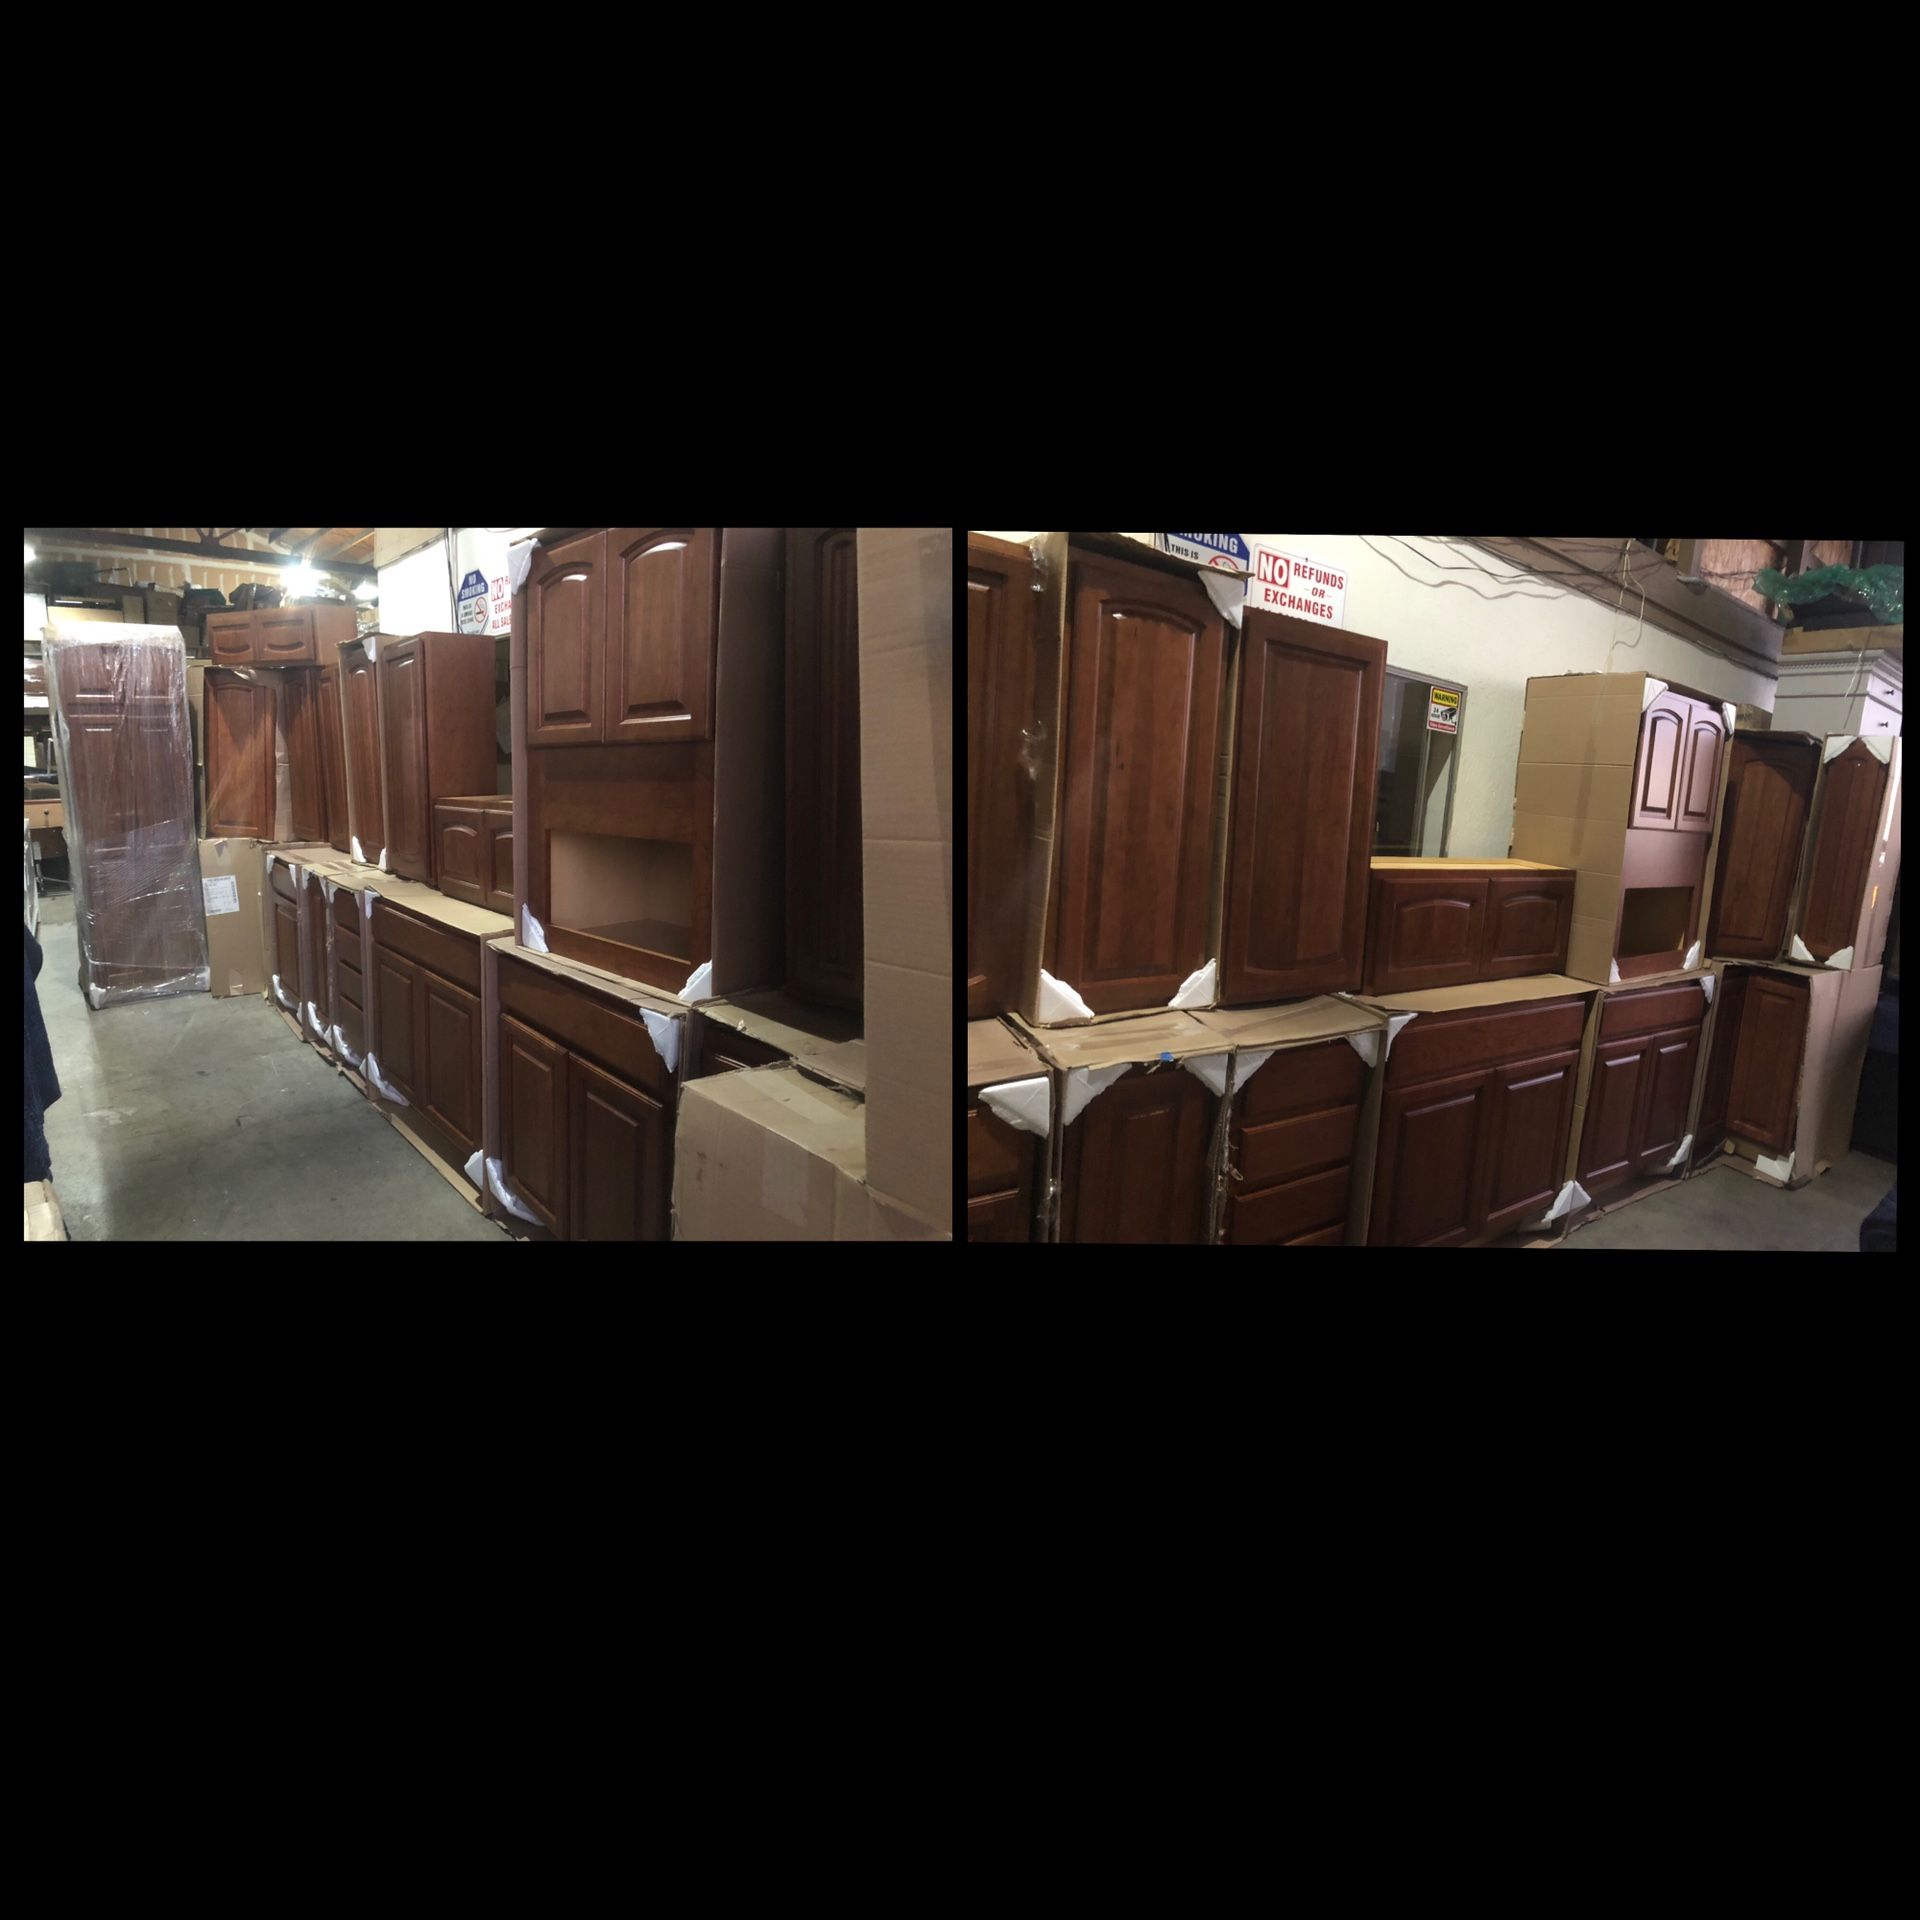 Beautiful new kitchen cabinets!!! Only 1,750$!!! Original price 5,000$!!!